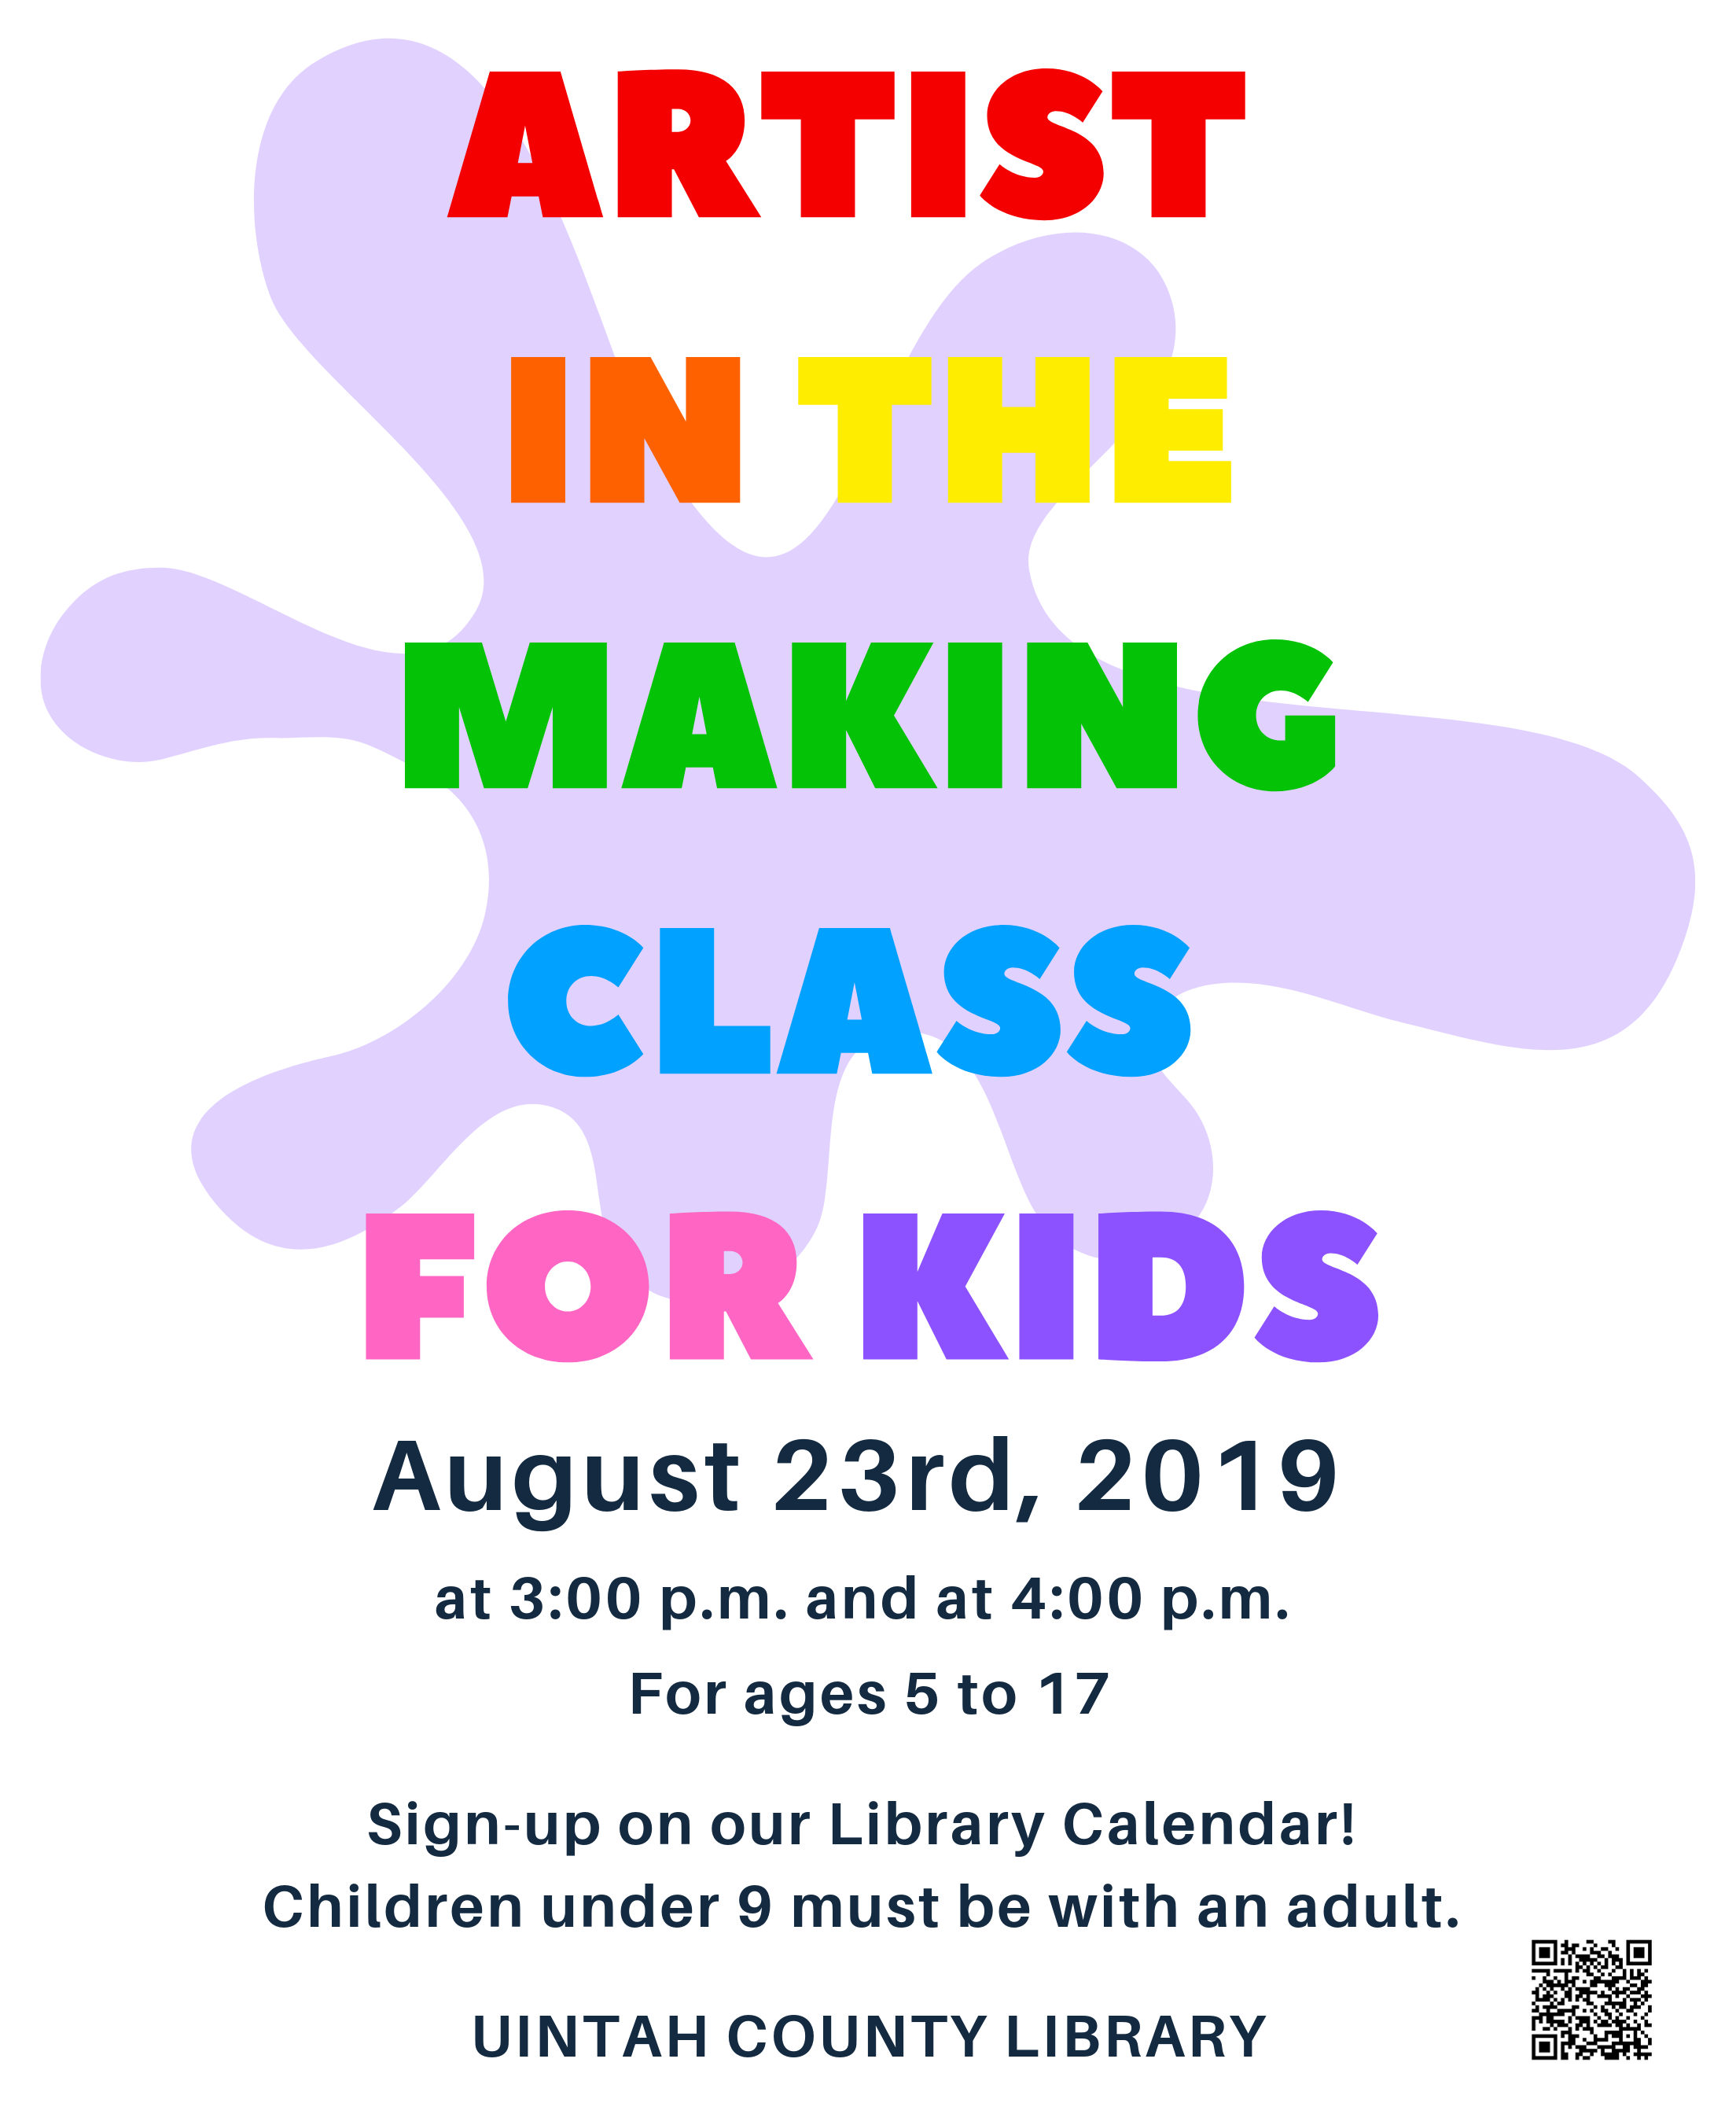 Image contains text: Artist in the Making Class For Kids August 23rd, 2019 at 3:00 p.m. and at 4:00 p.m. For ages 5 to 17 Sign-up on our Library Calendar! Children under 9 must be with an adult. Uintah County Library. Image also includes paint splatter clipart and a QR code. 